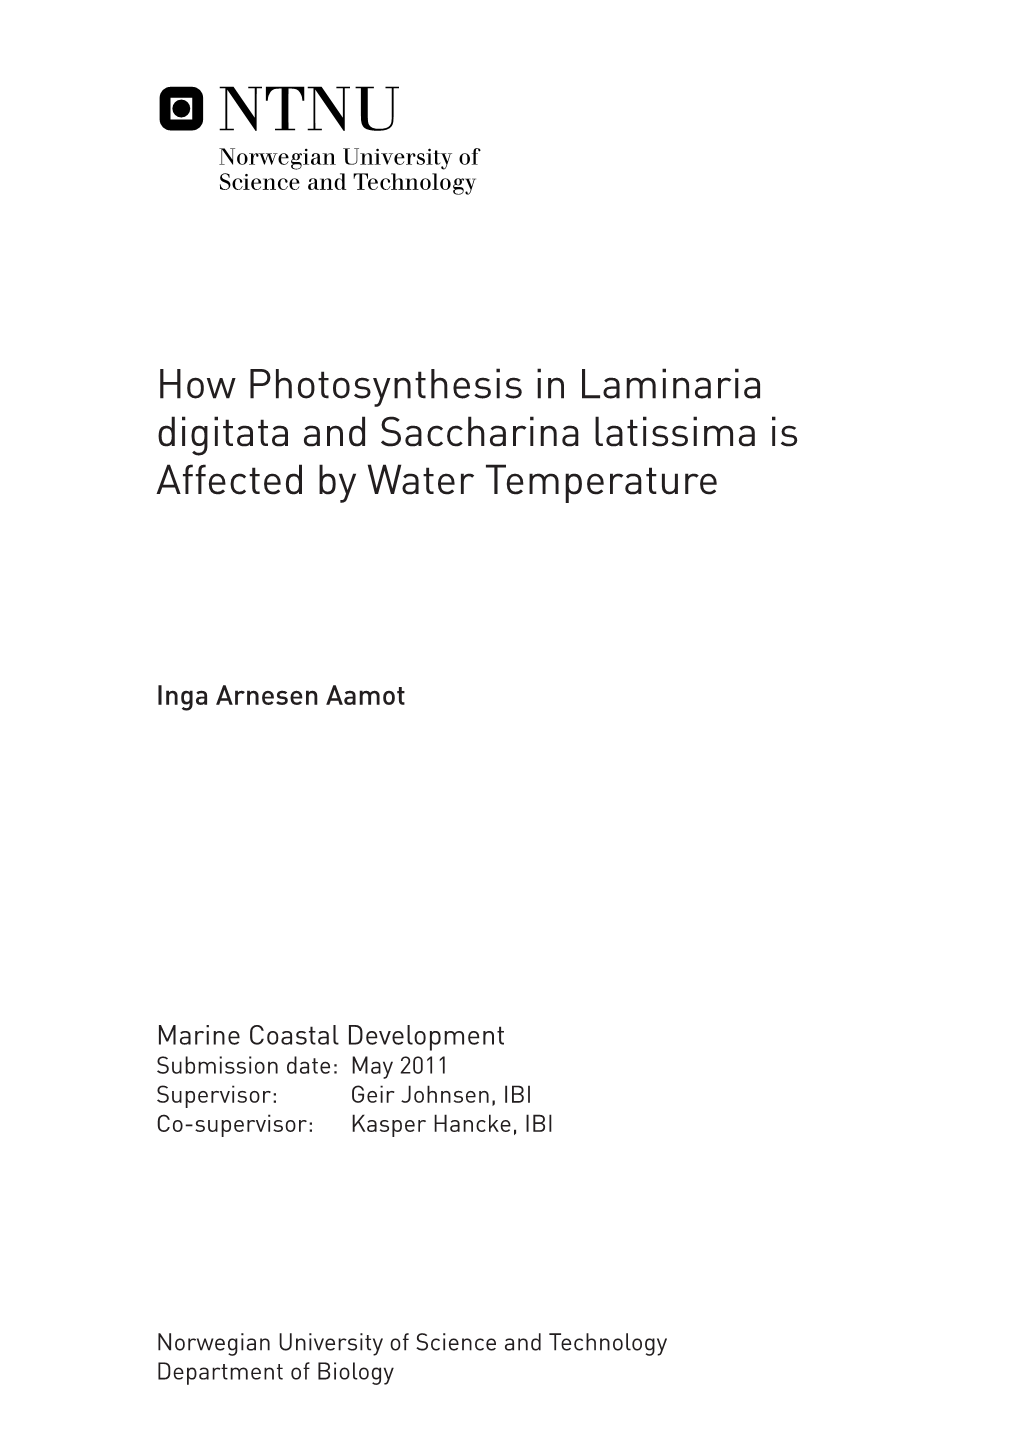 How Photosynthesis in Laminaria Digitata and Saccharina Latissima Is Affected by Water Temperature